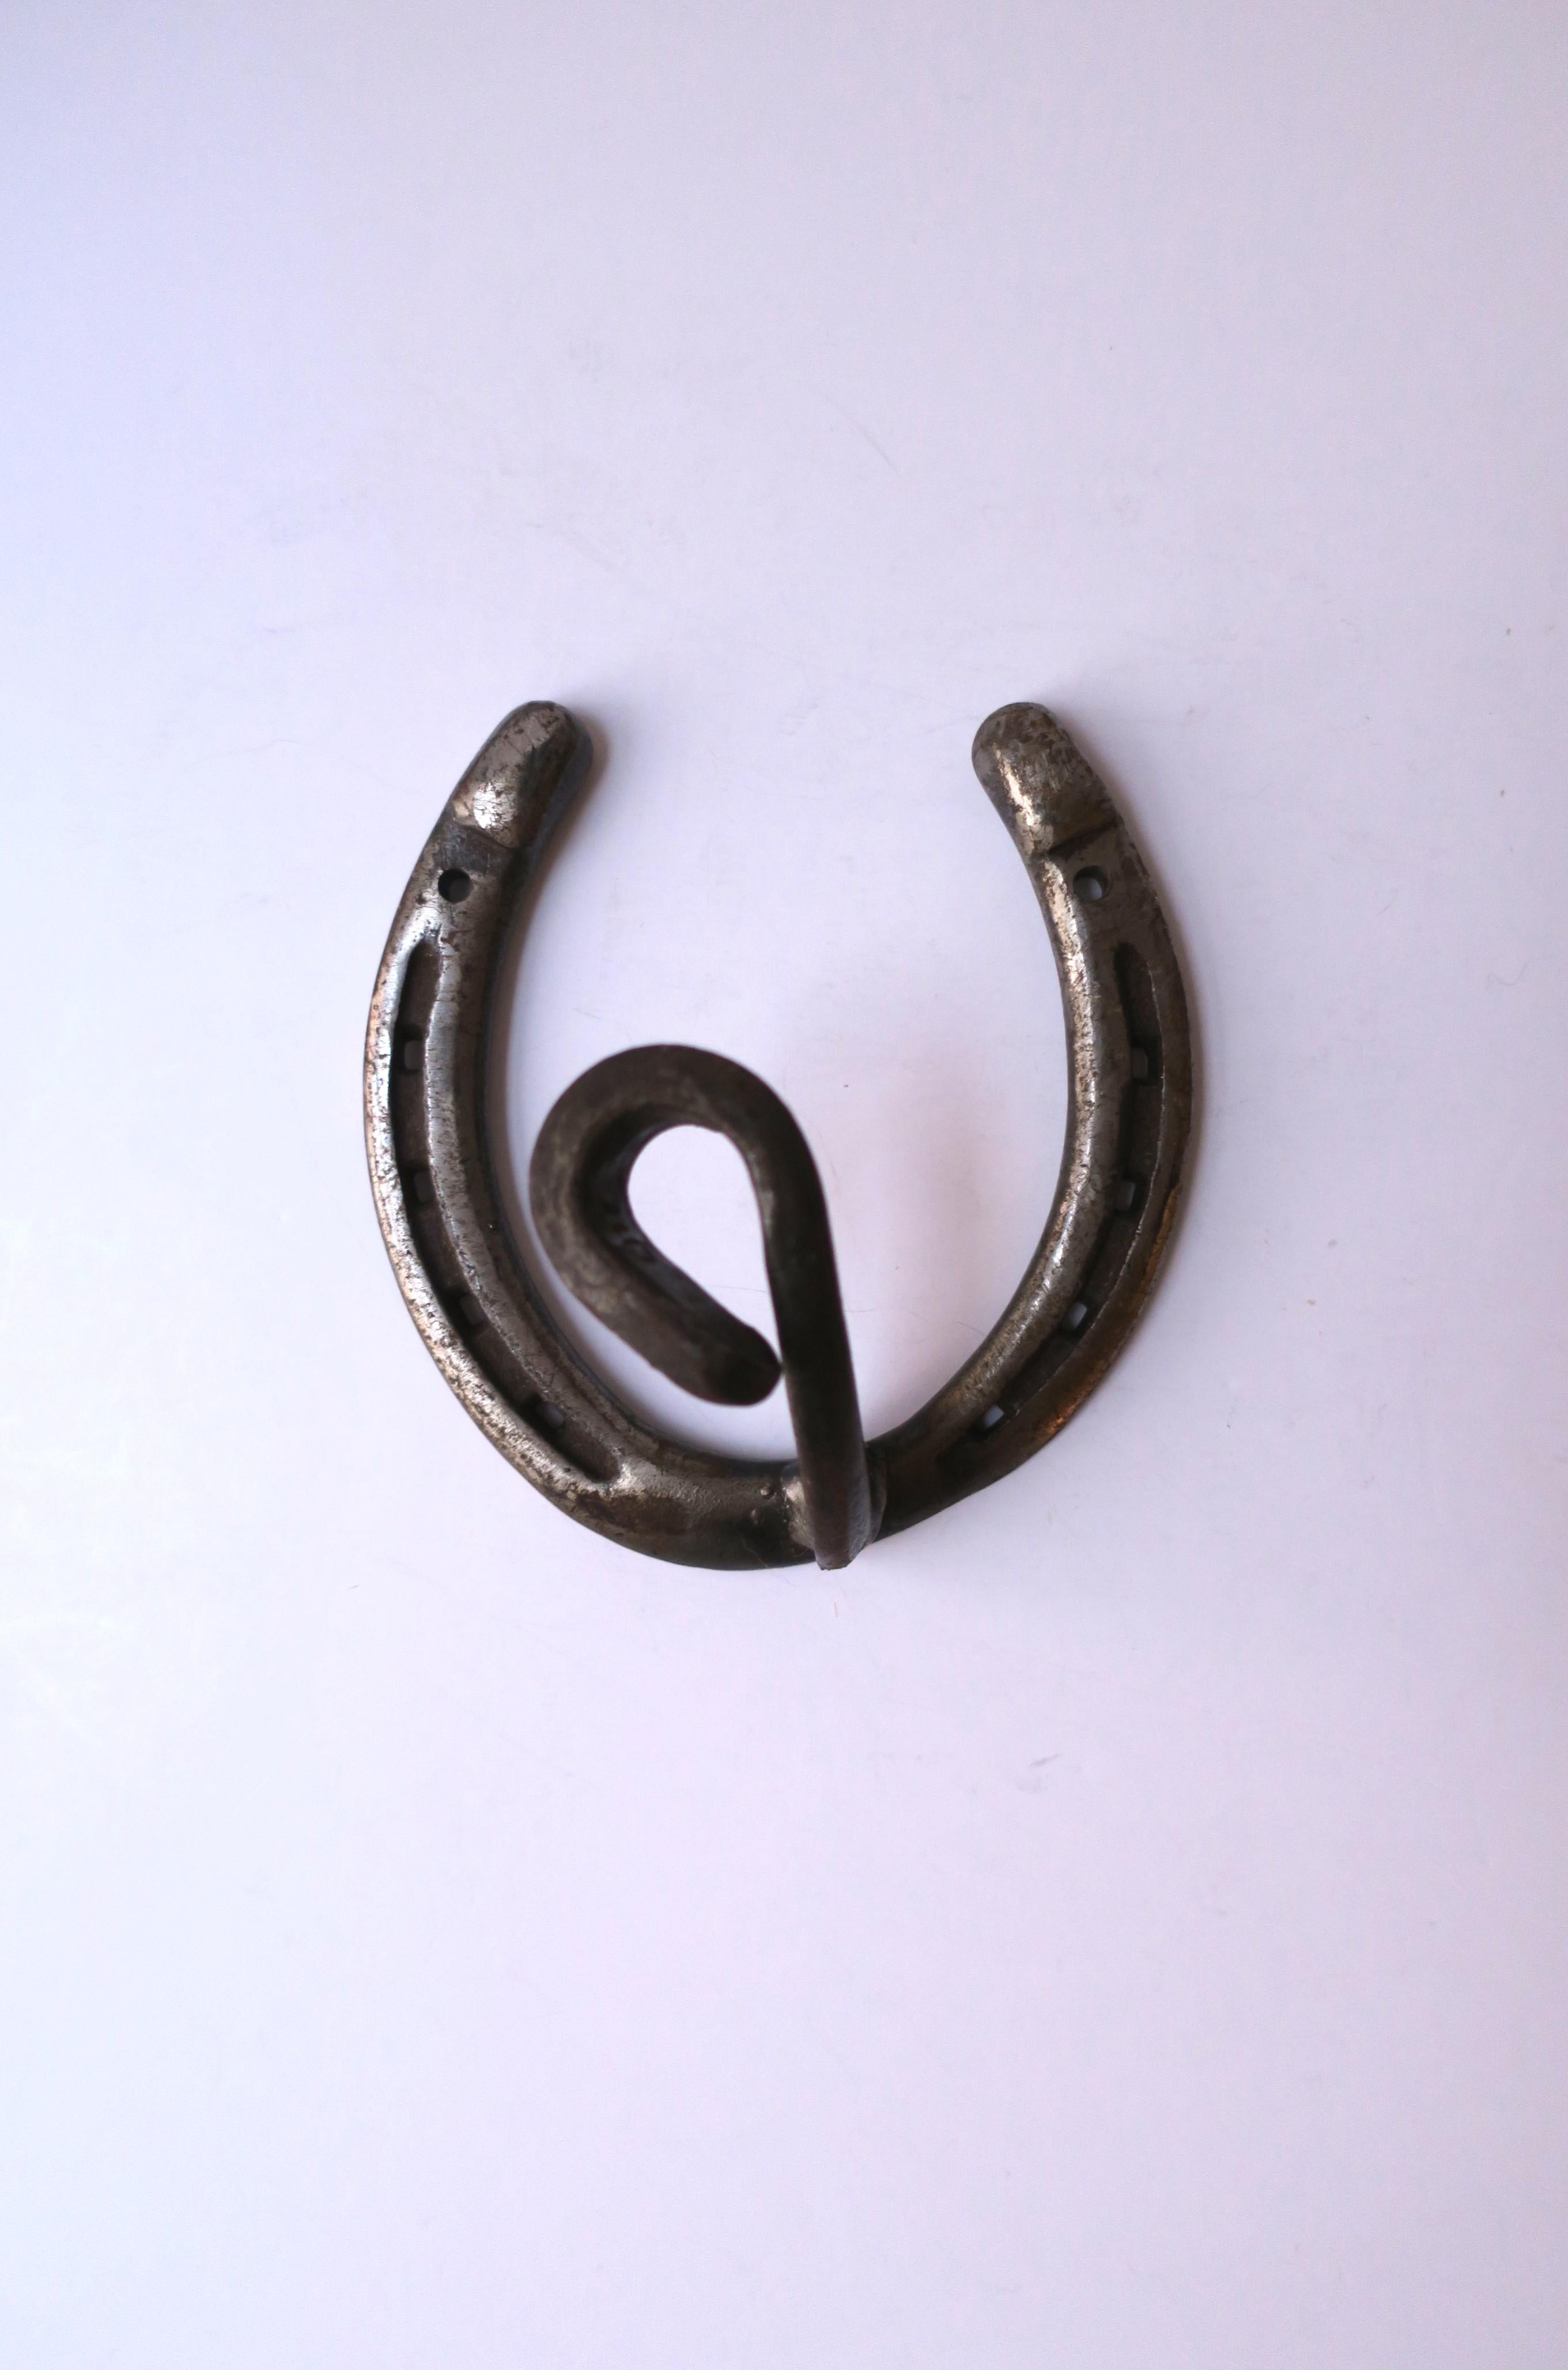 A substantial steel horseshoe wall hook, circa early to mid-20th century., USA. A great piece for a barn, kitchen, foyer, mud room, residential or commercial projects/hotel, etc. Dimensions: 3